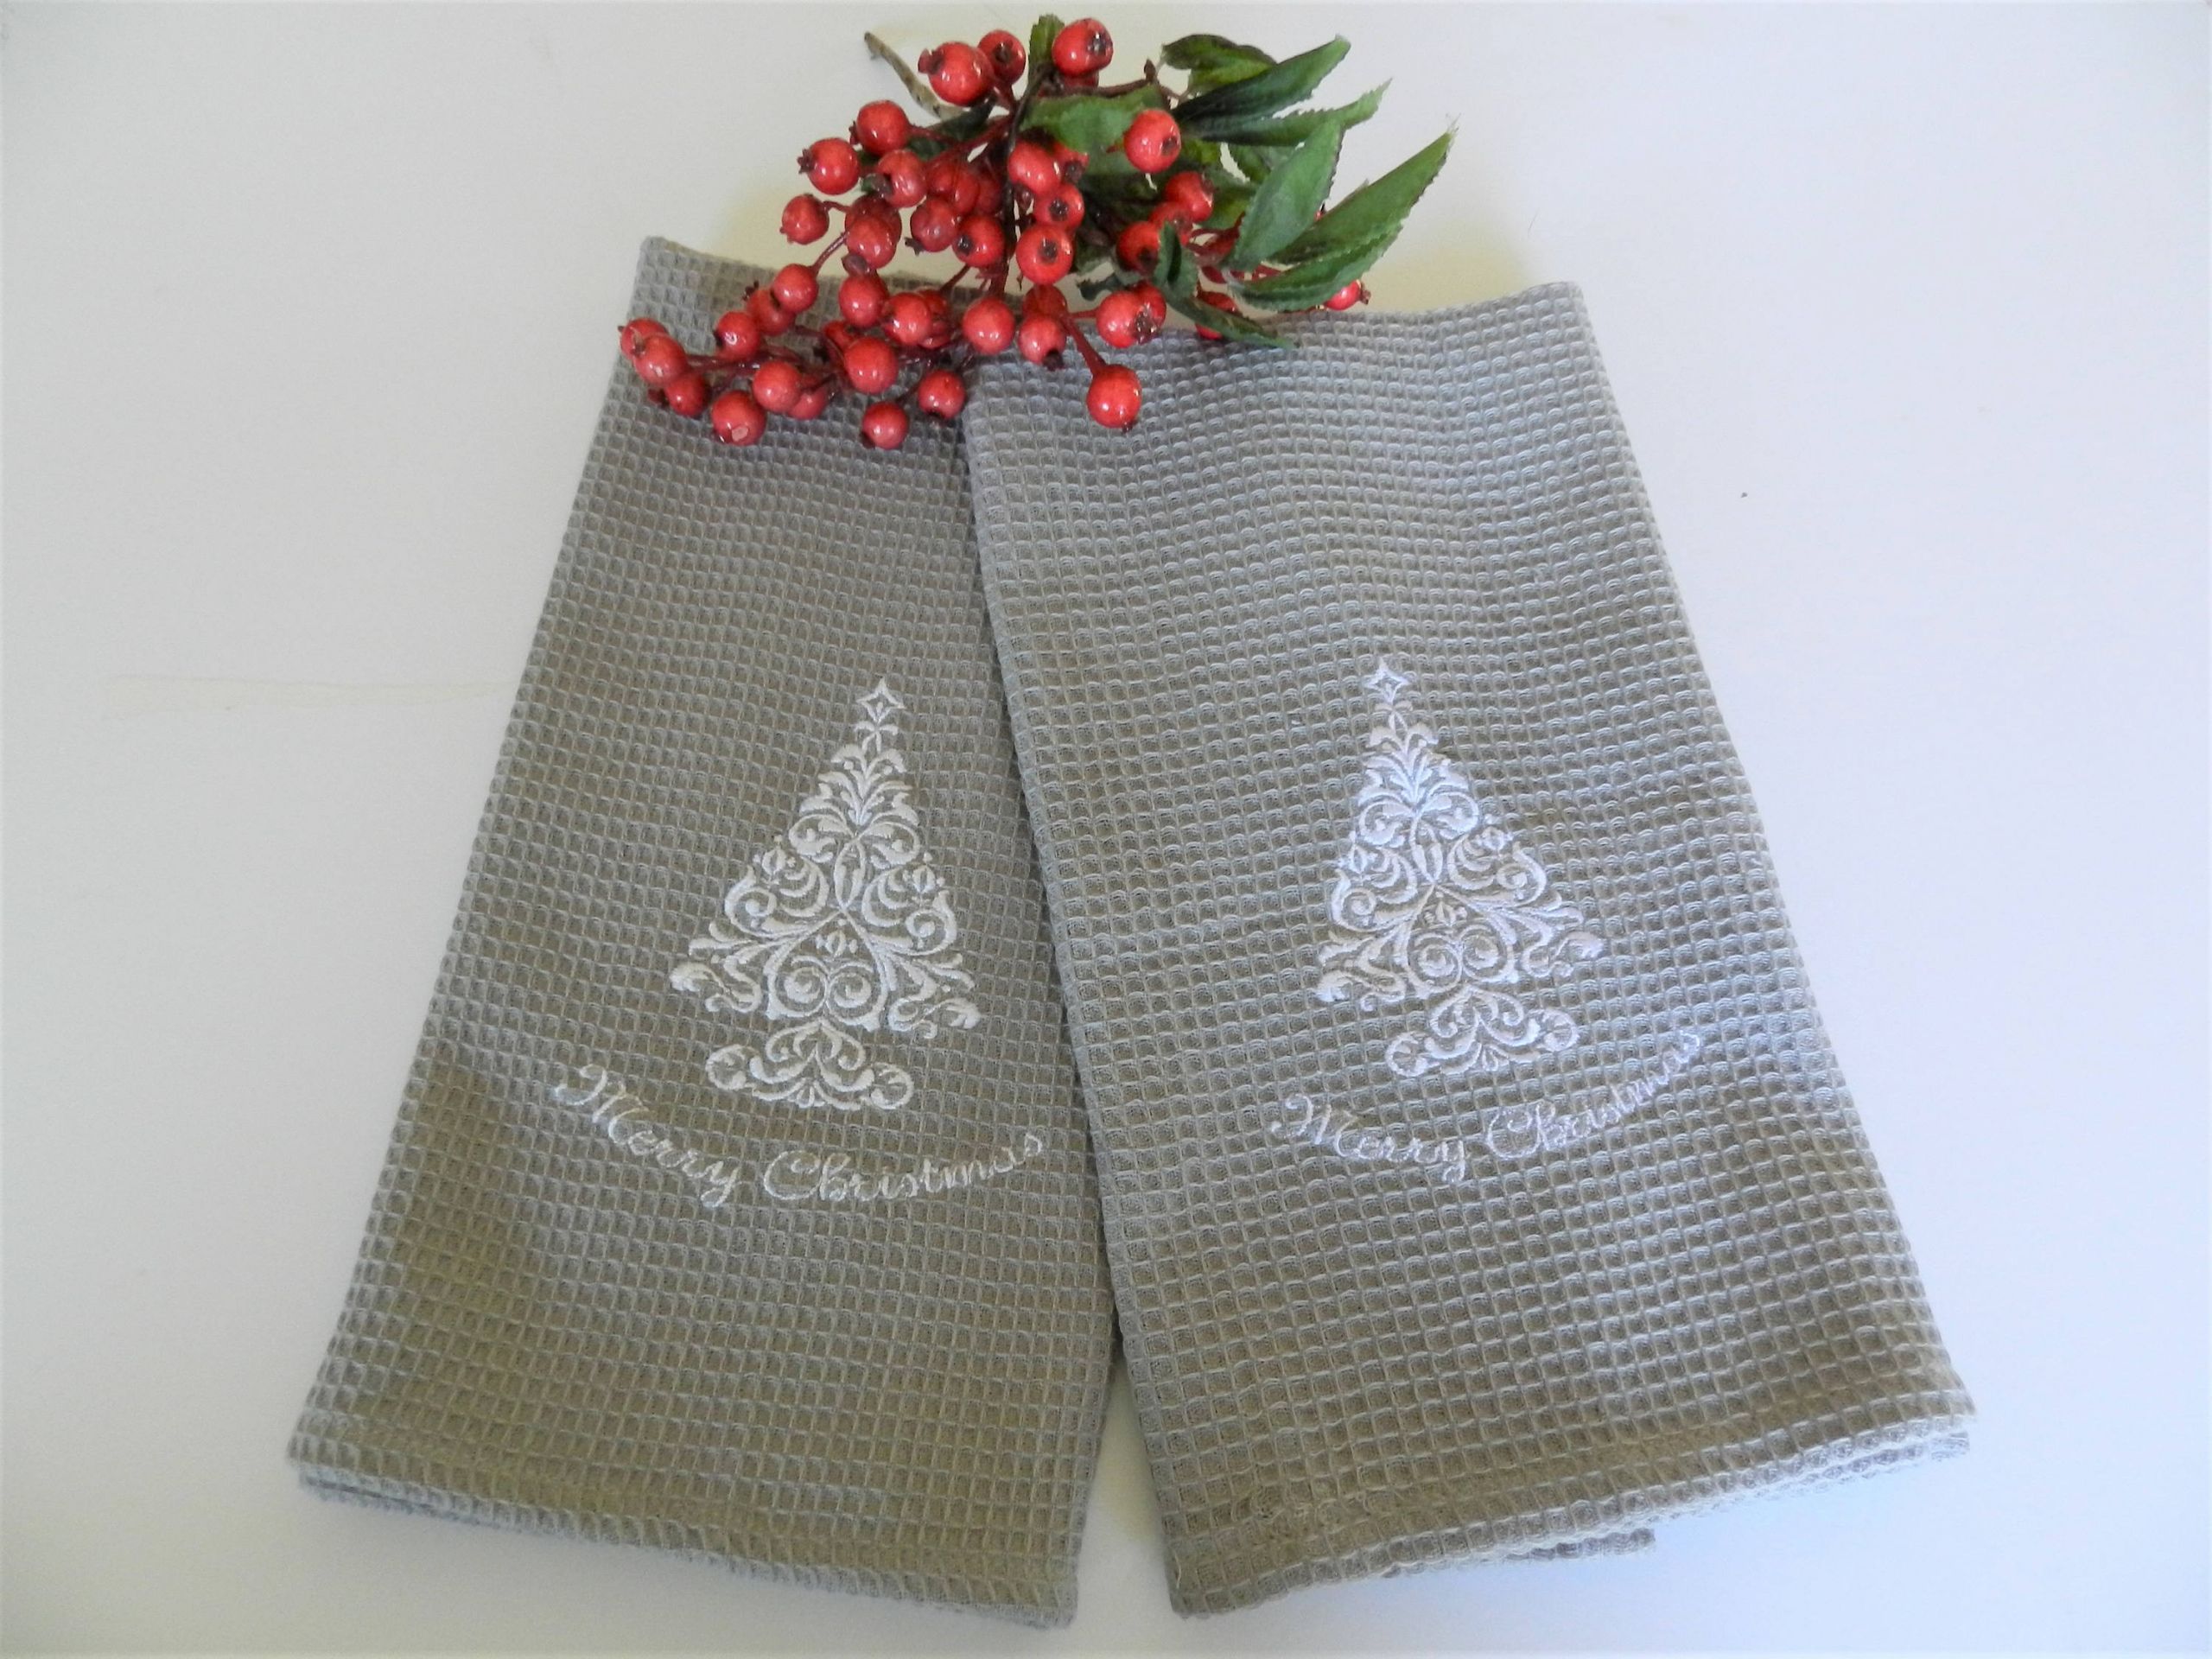 Rustic Kitchen Towels
 New Christmas Towels Gray Towels Rustic Kitchen Towels New